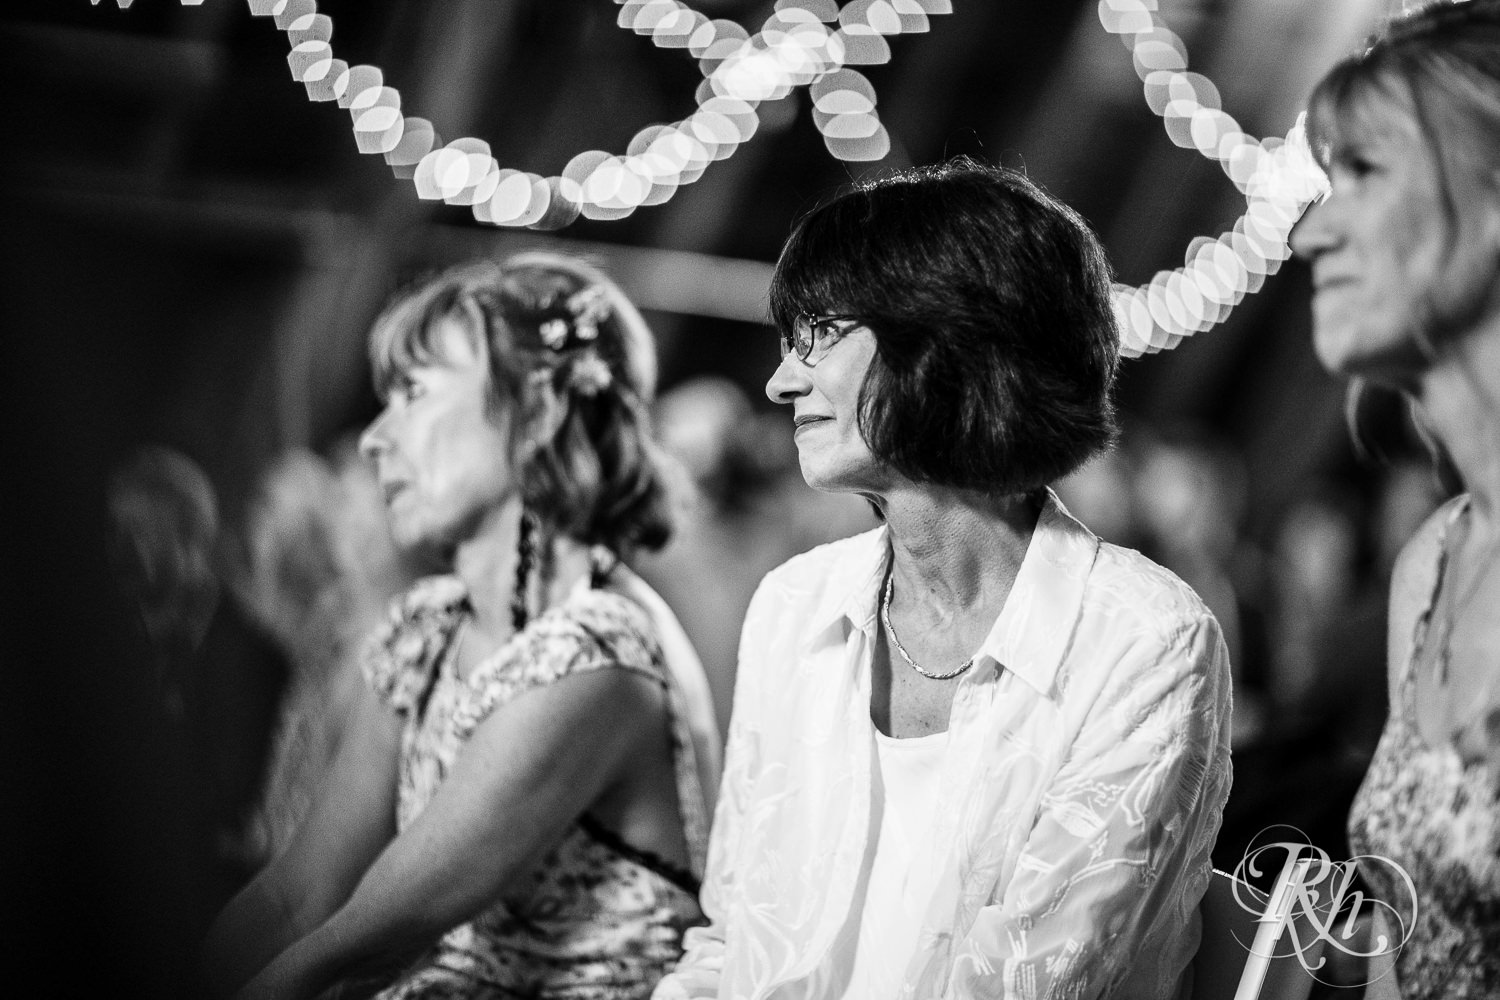 Mom smiles during wedding ceremony at Coops Event Barn in Dodge Center, Minnesota.